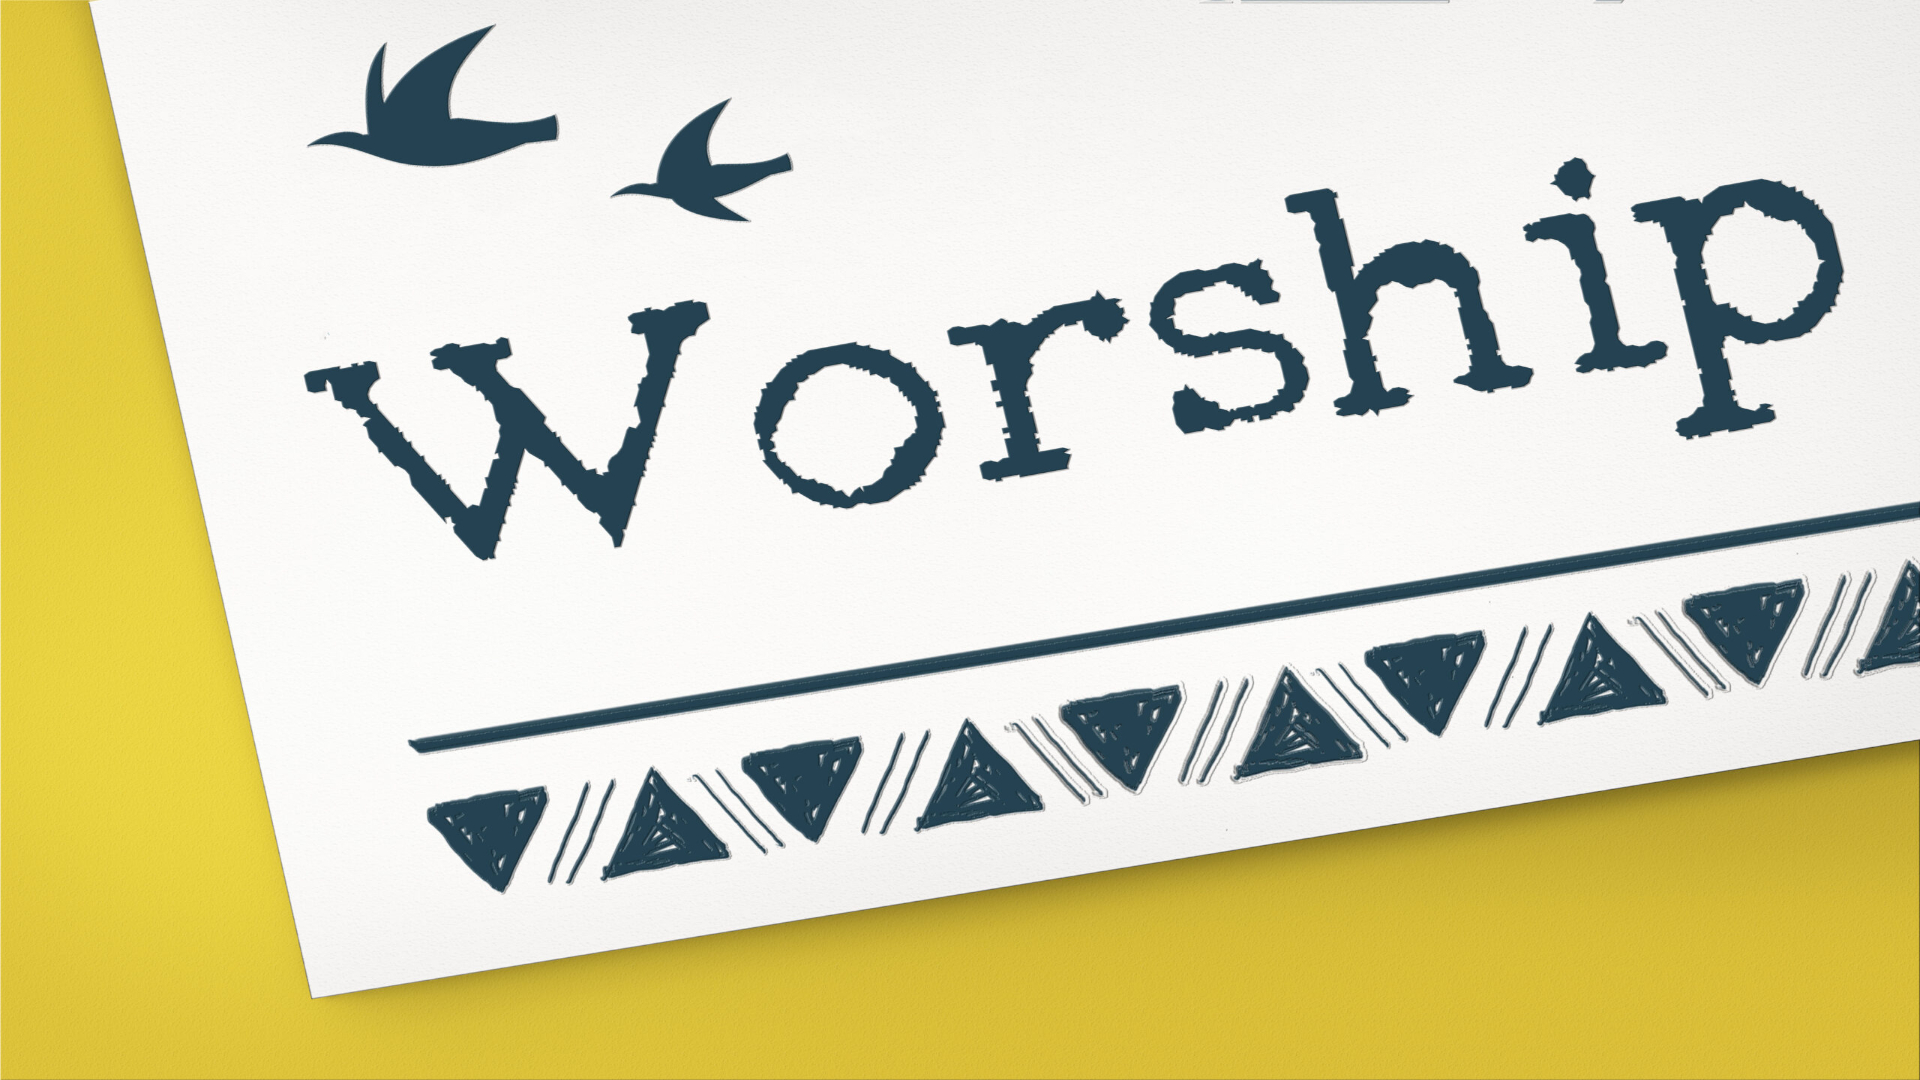 Worship: To Serve the Lord